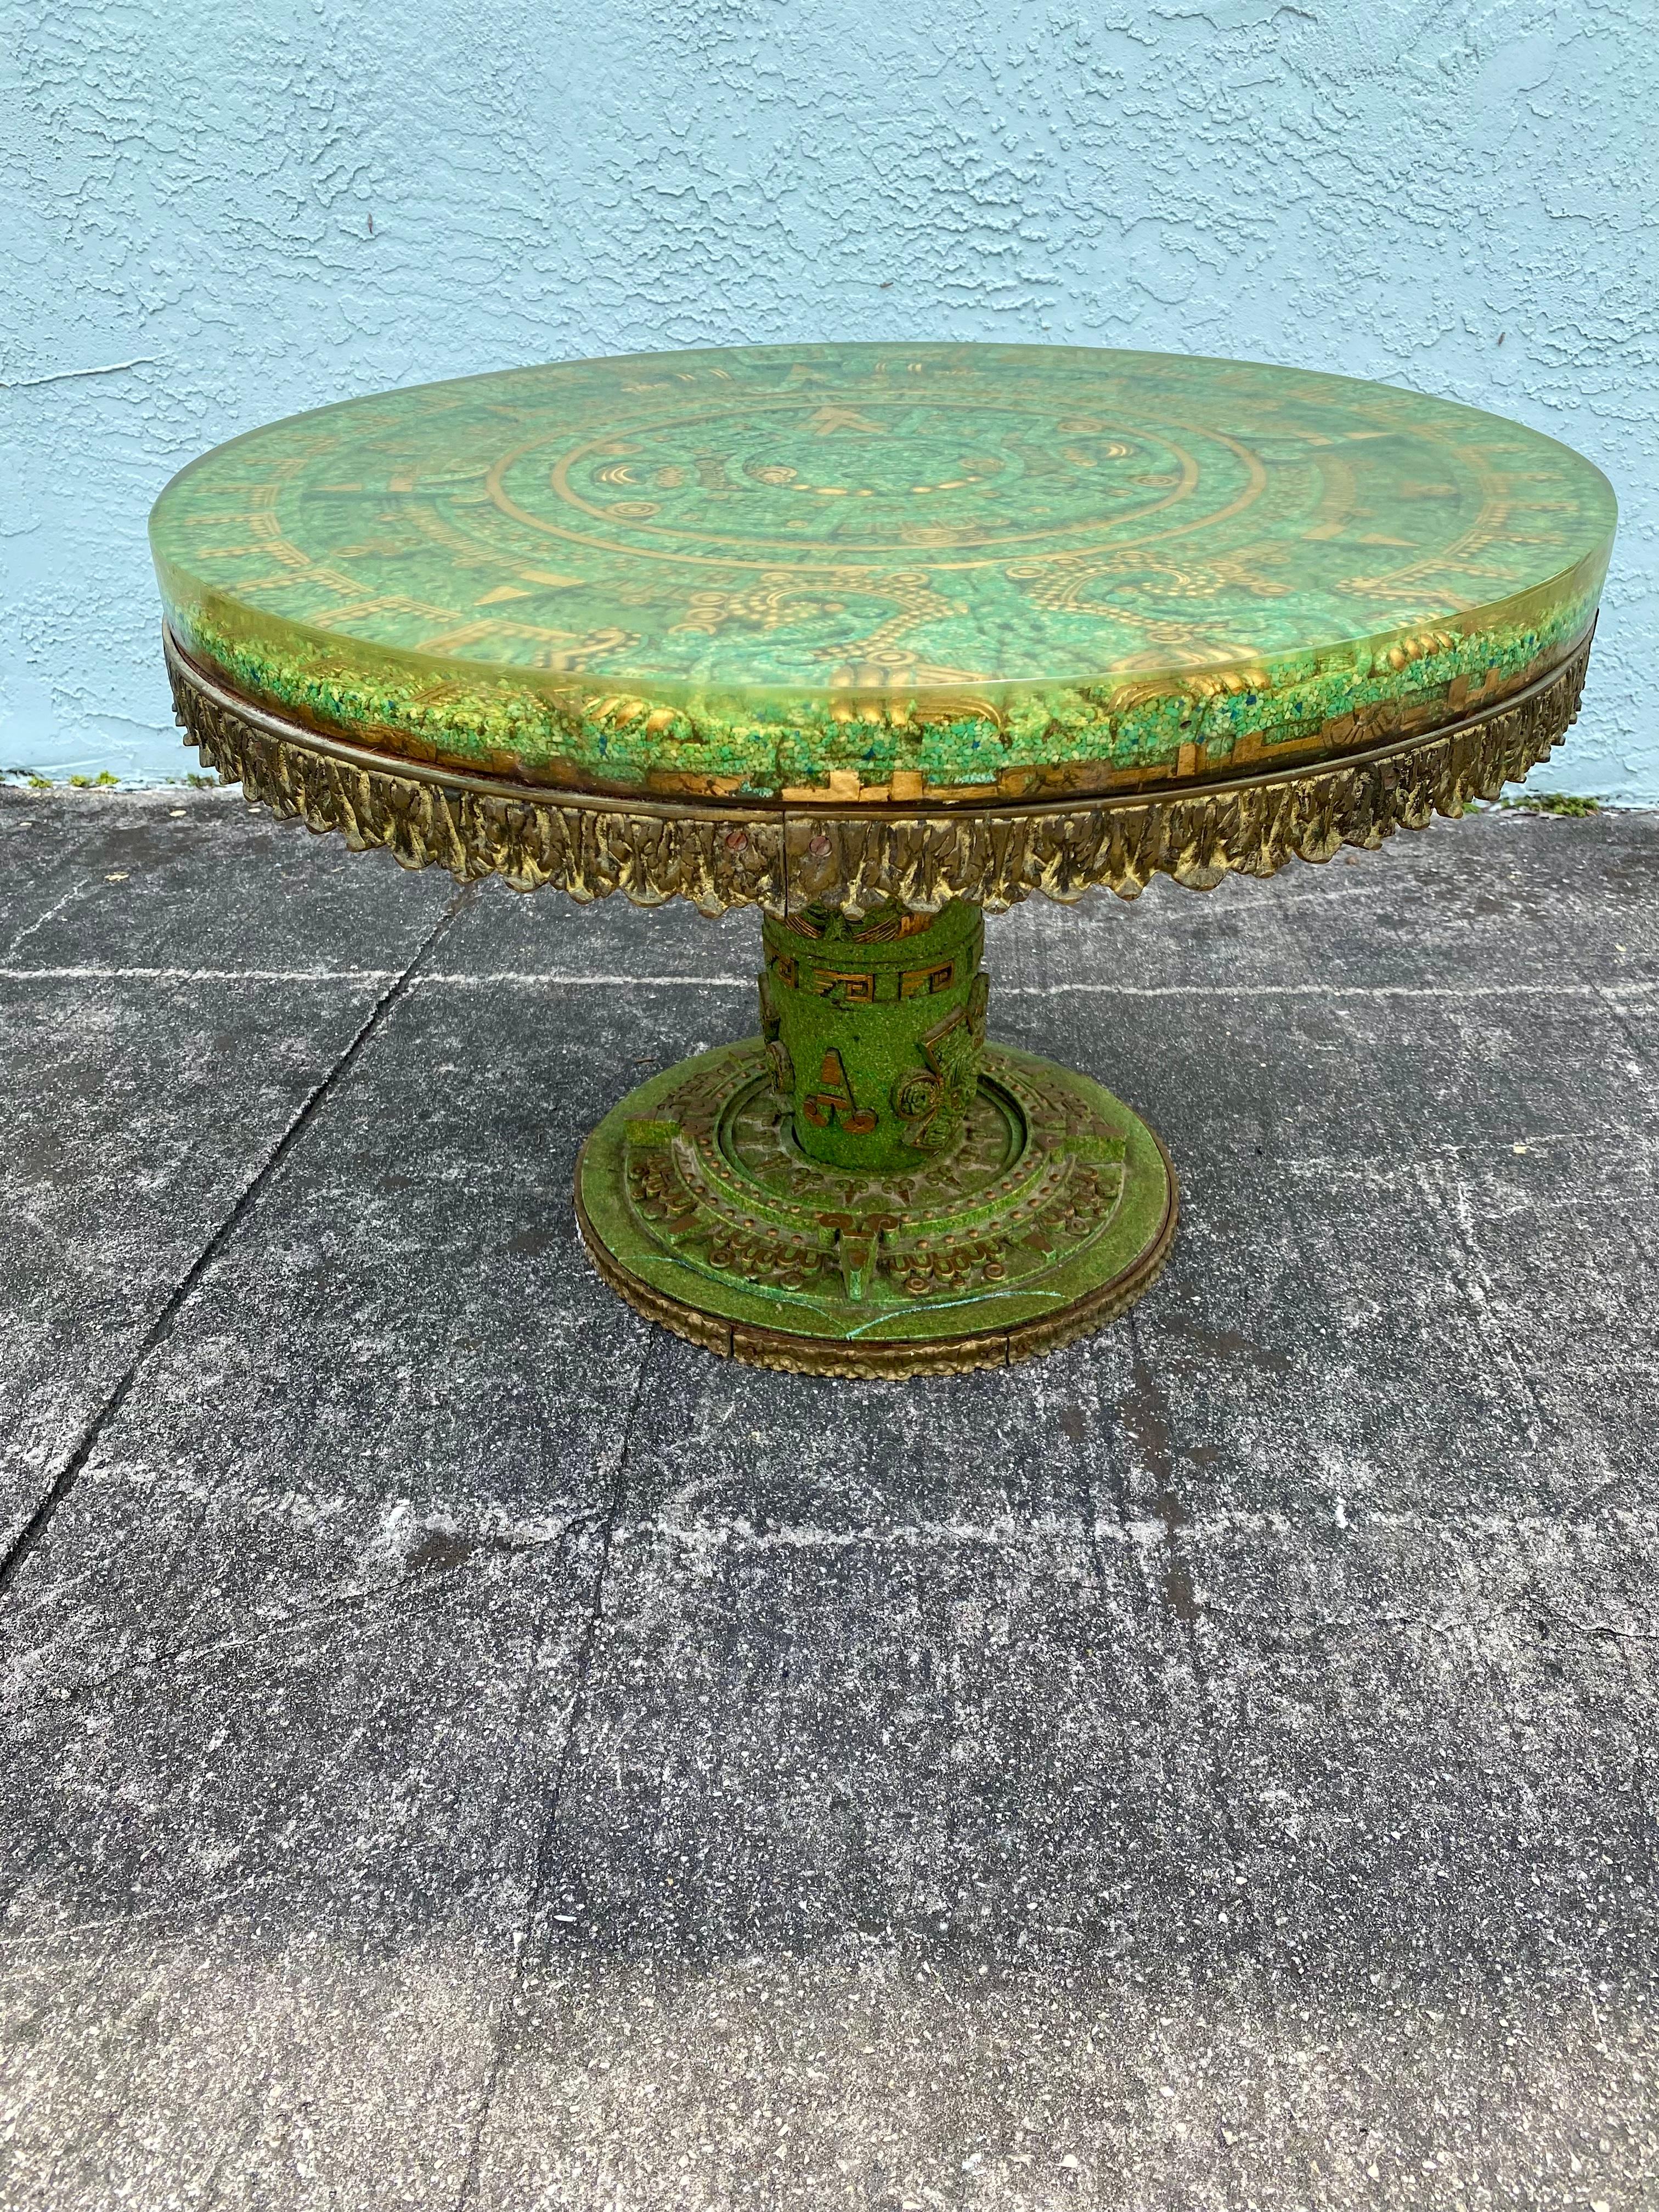 Sculpted Inlay Malachite Brutalist Bronze Wood Stone Resin Aztec Circular Table  For Sale 28